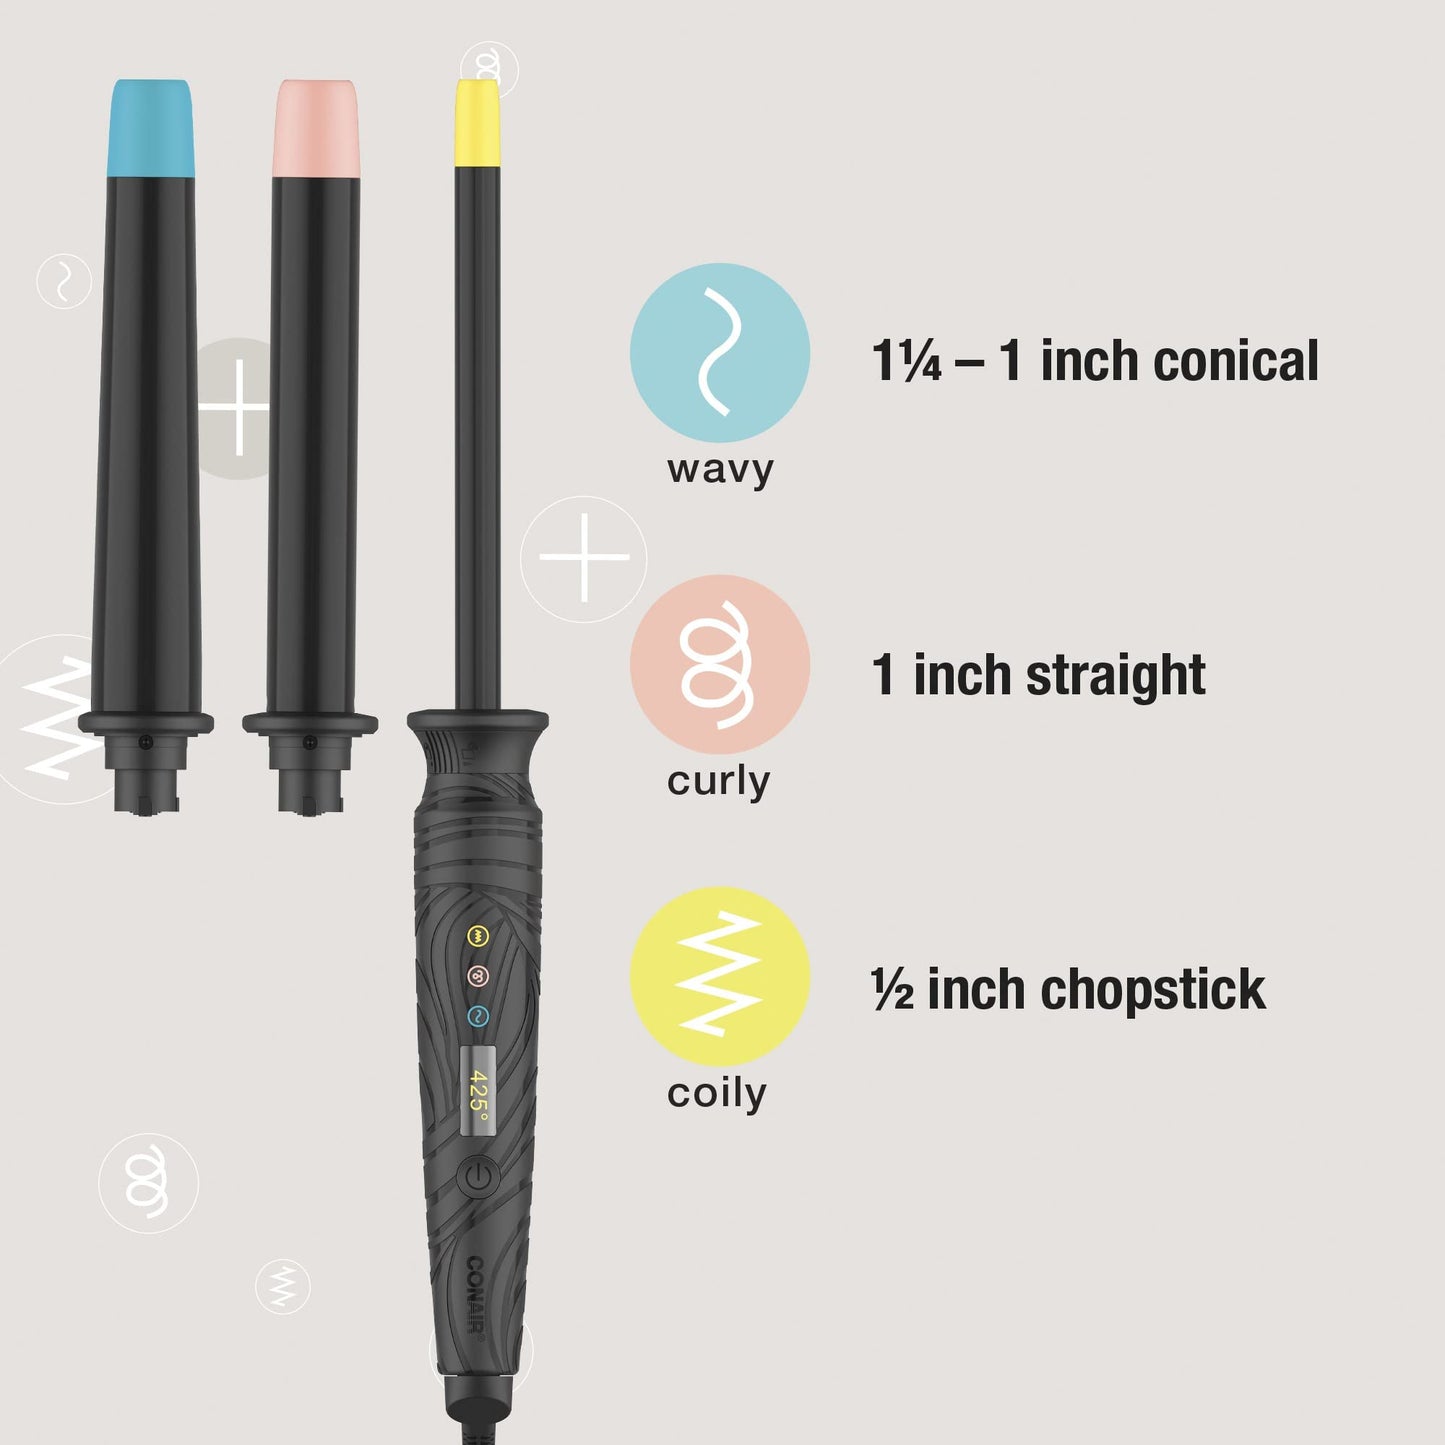 Conair The Curl Collective 3-in-1 Ceramic Curling Wand, 3 Interchangeable Barrels Designed to Create a Specific Curl Pattern - Chopstick, 1-inch, and 1 1/4-inch to 1-inch Tapered Barrel